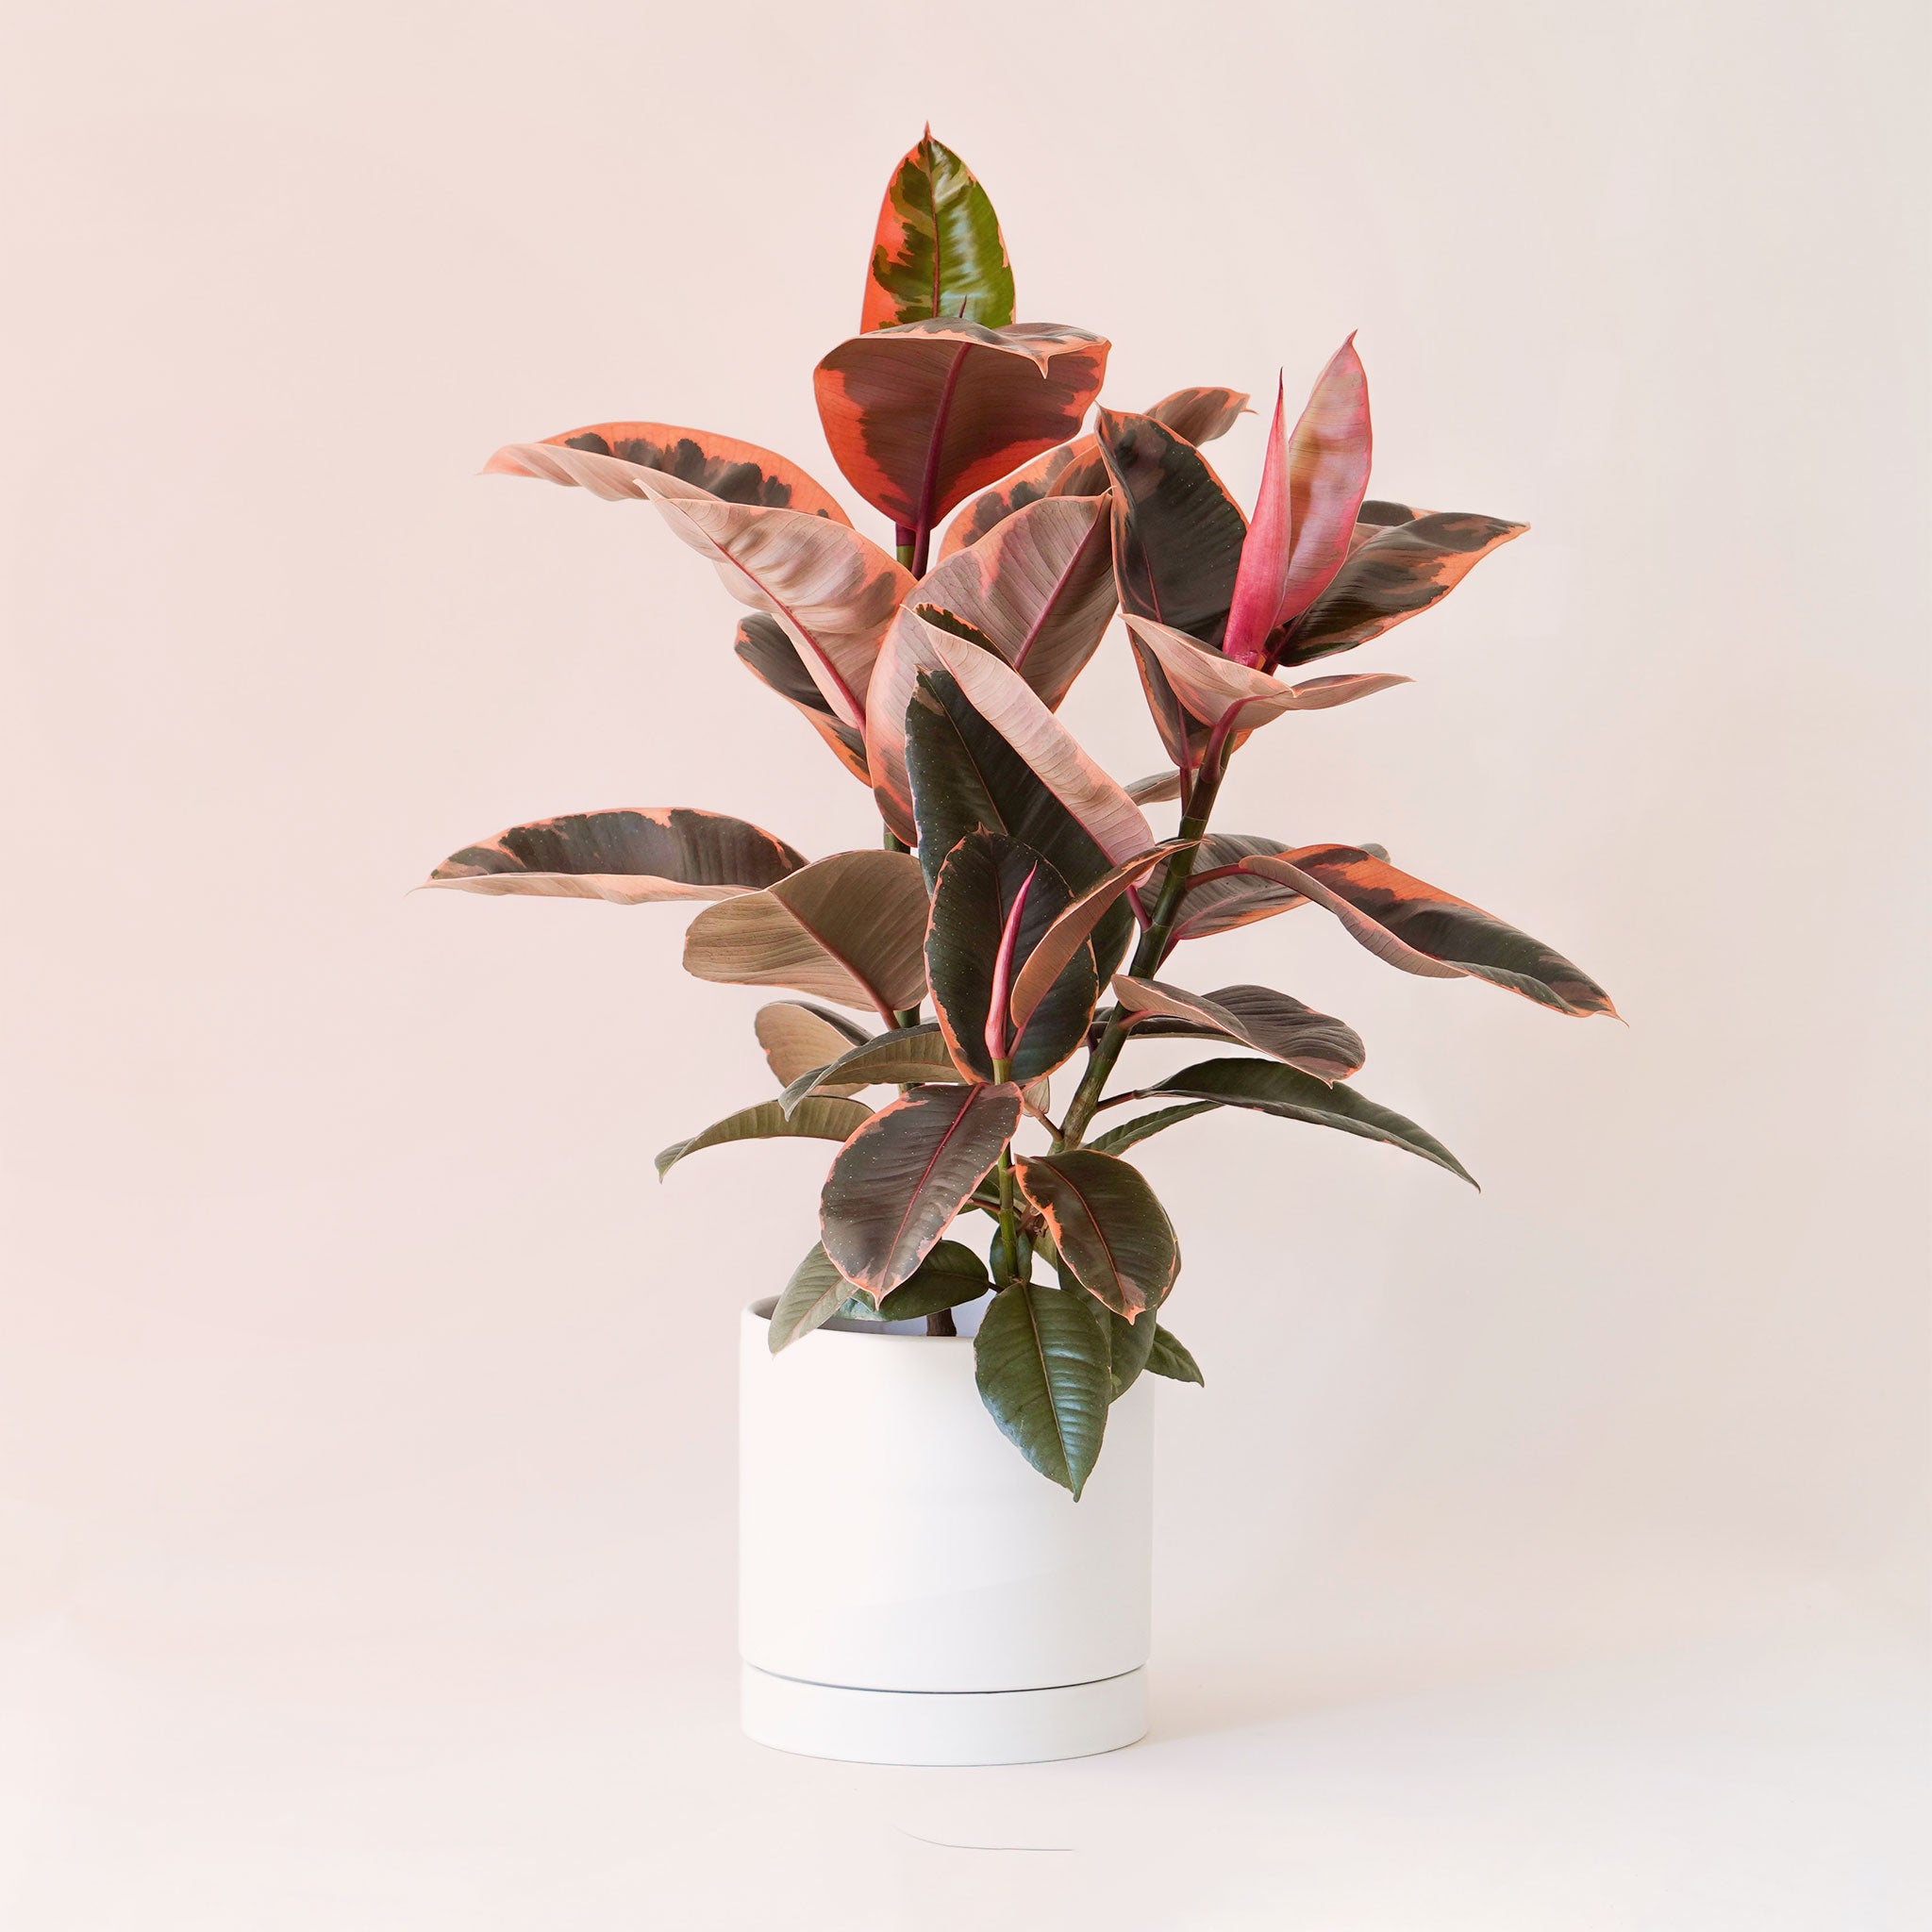 A house plant in a white pot that has rounded dark green leaves with a ton of reddish and pink variegation.